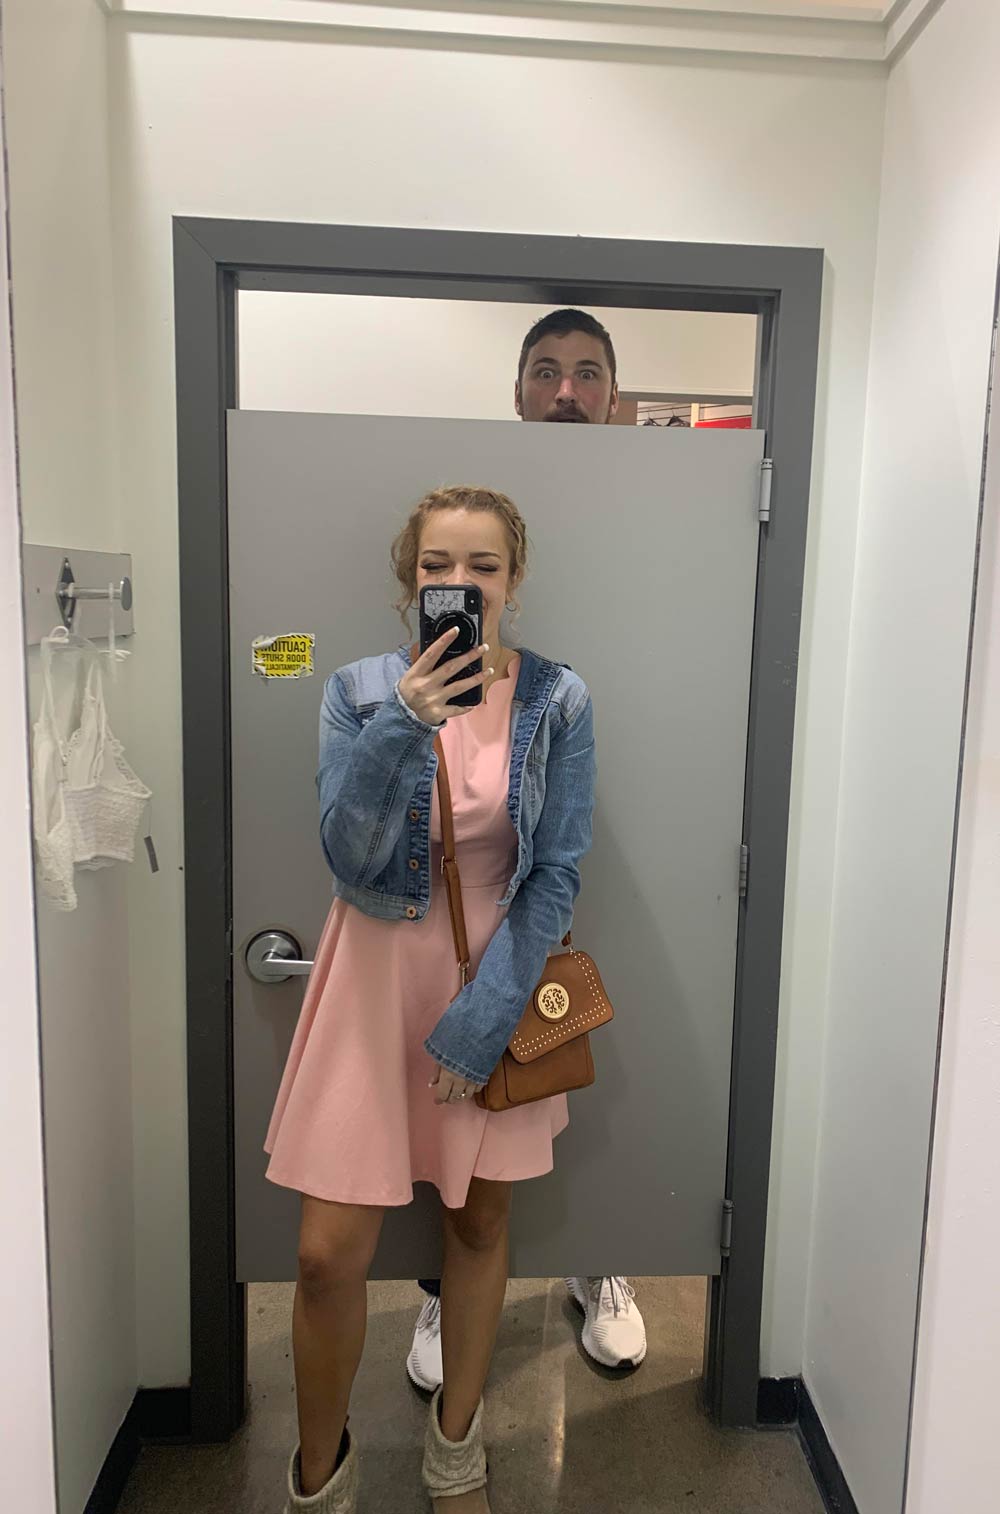 Turns out dressing rooms aren’t safe from tall people